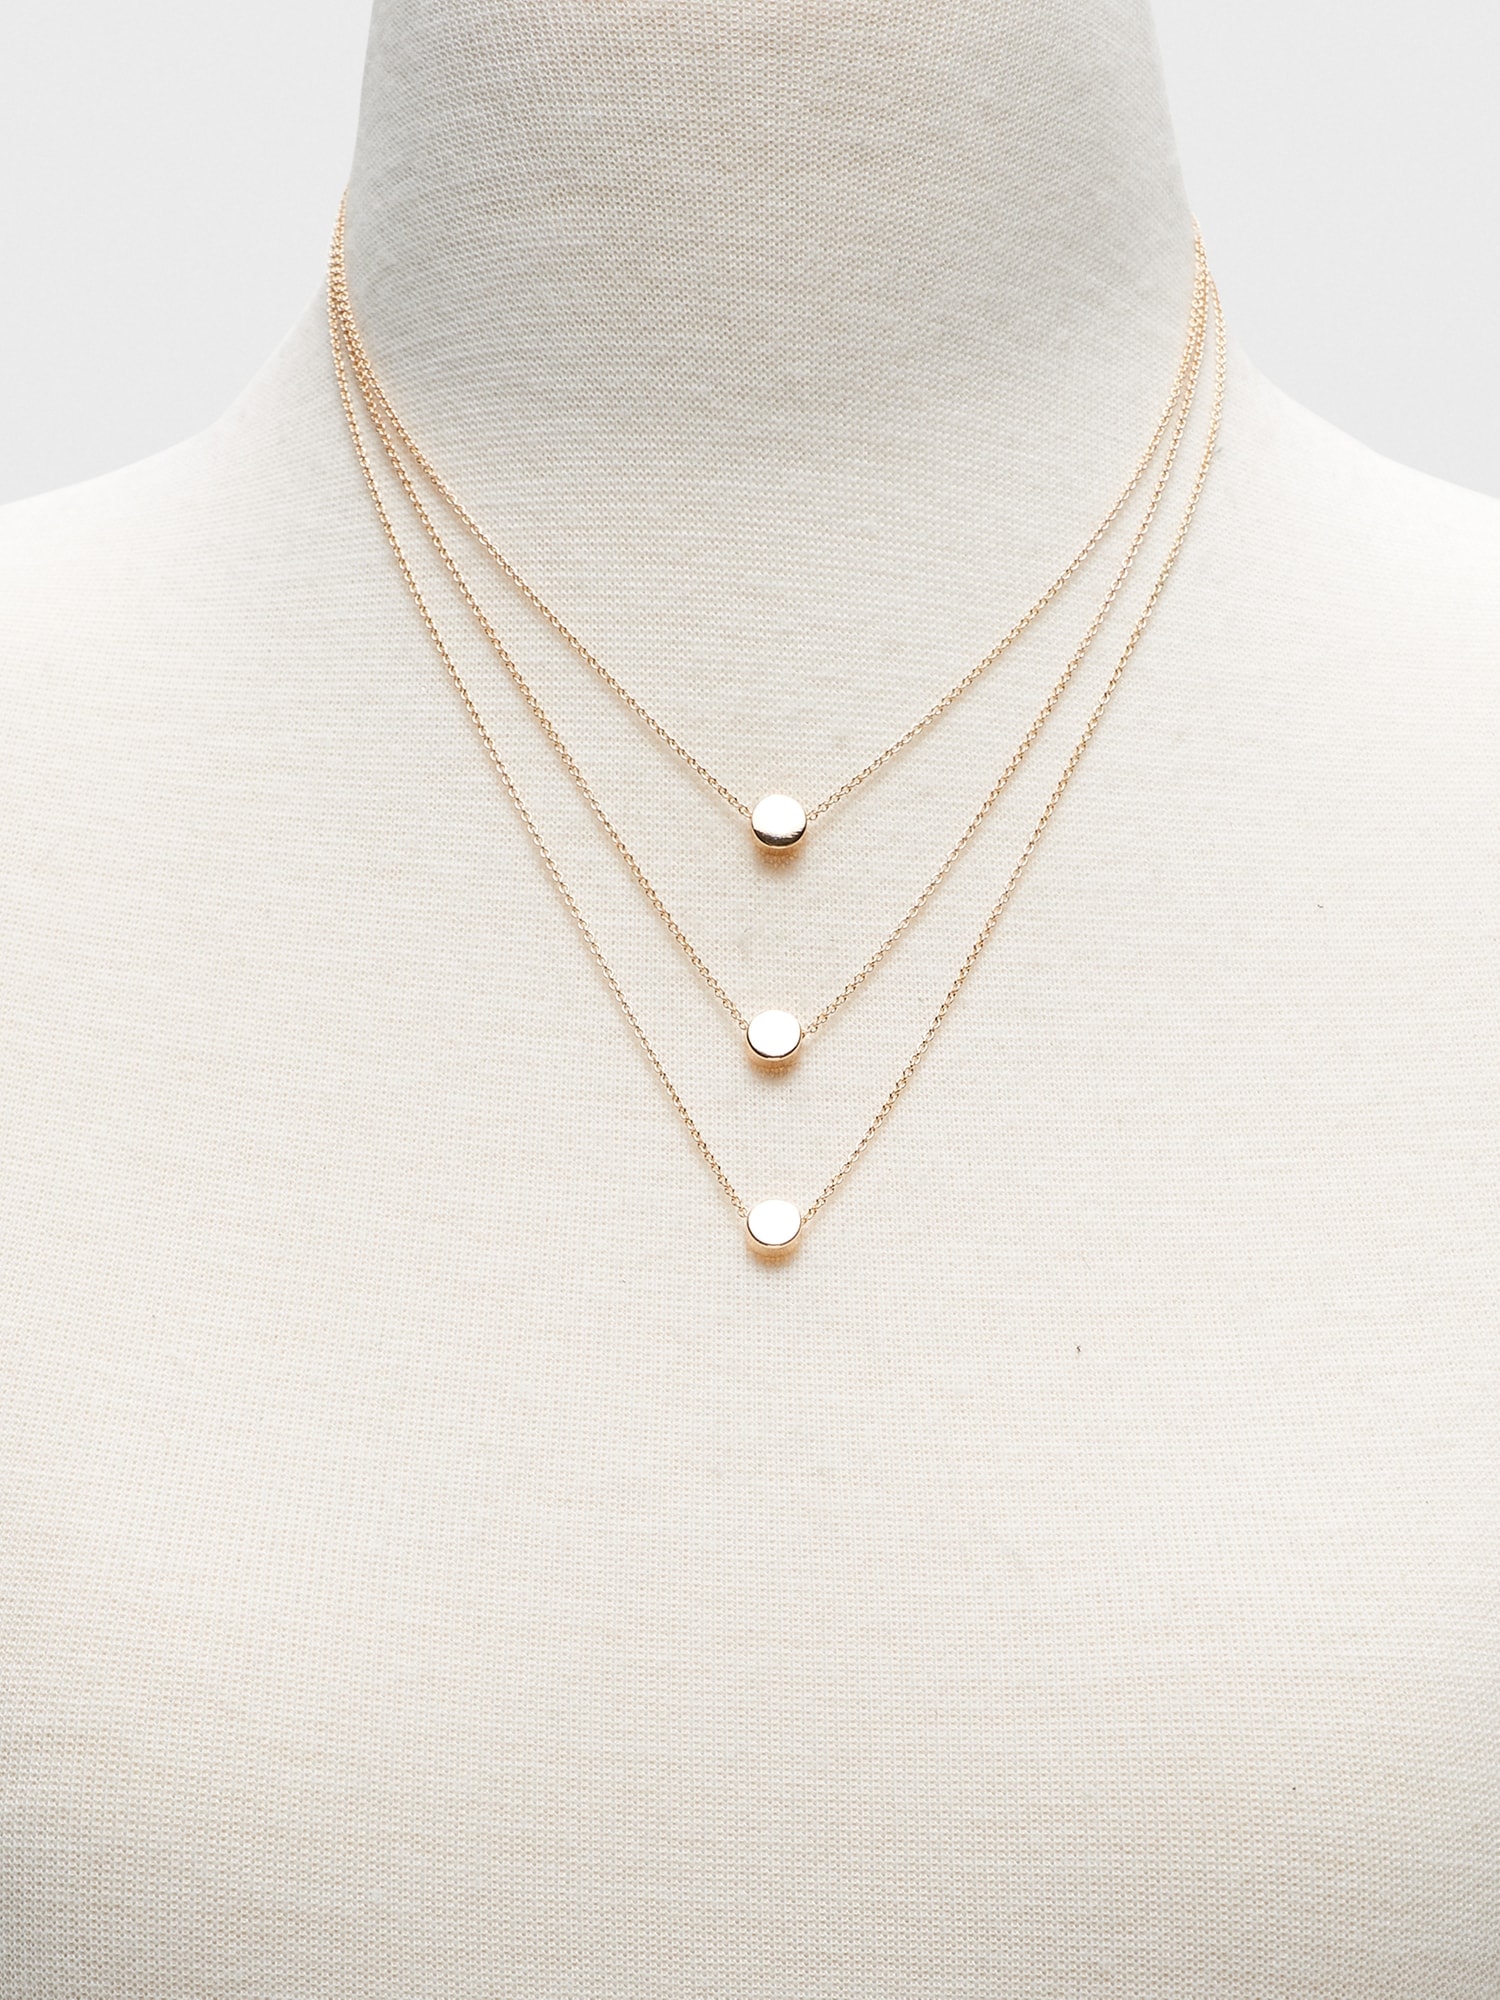 Triple Dot Layered Necklace